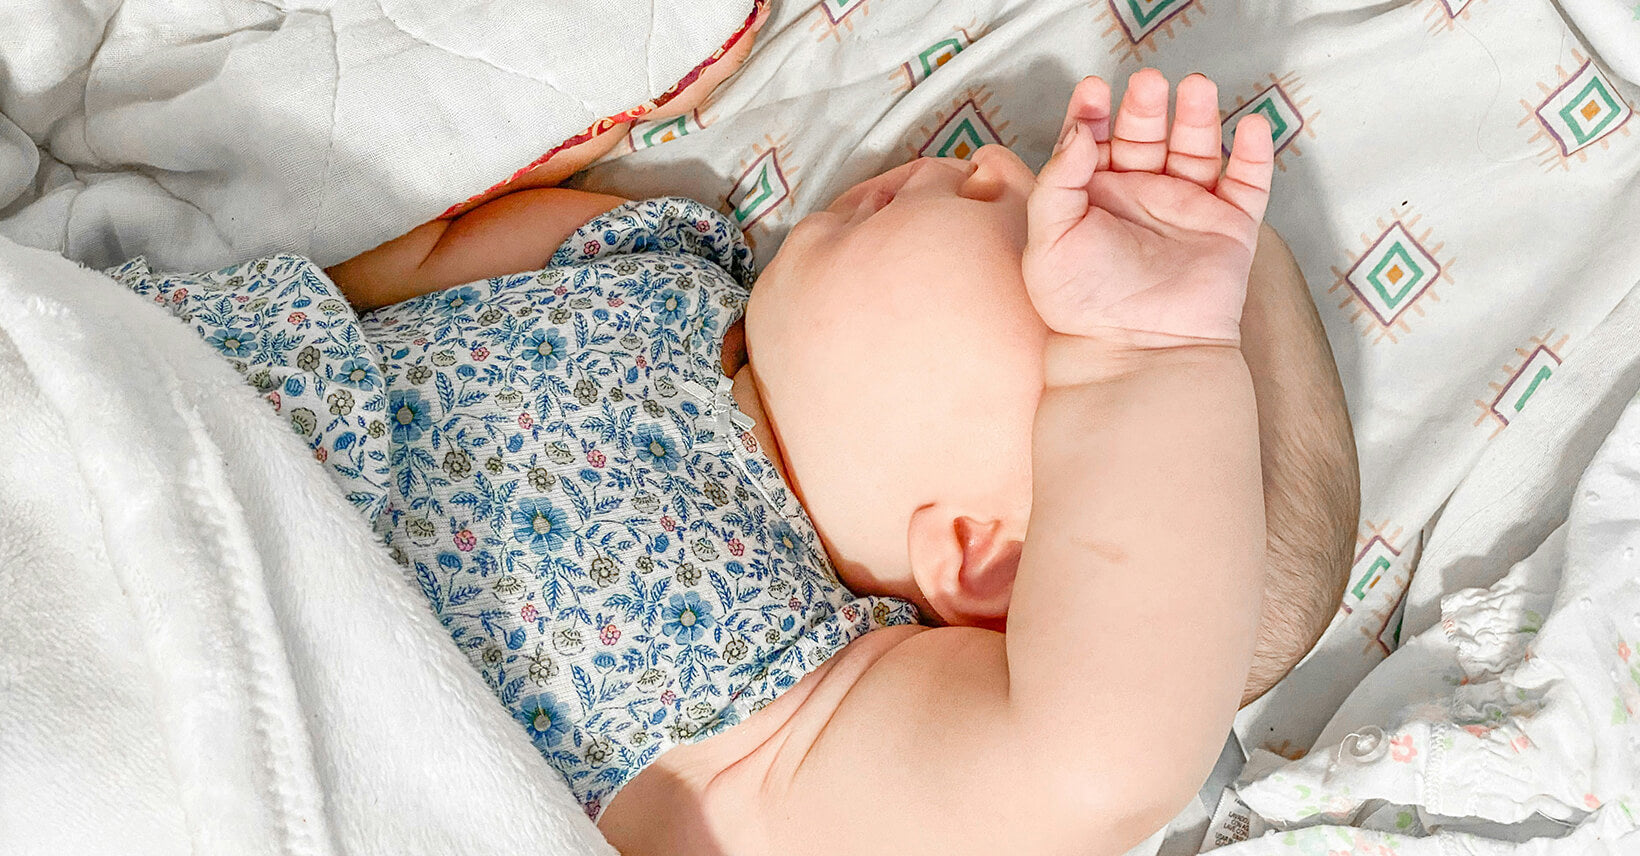 How Should You Dress Your Baby for Sleep?